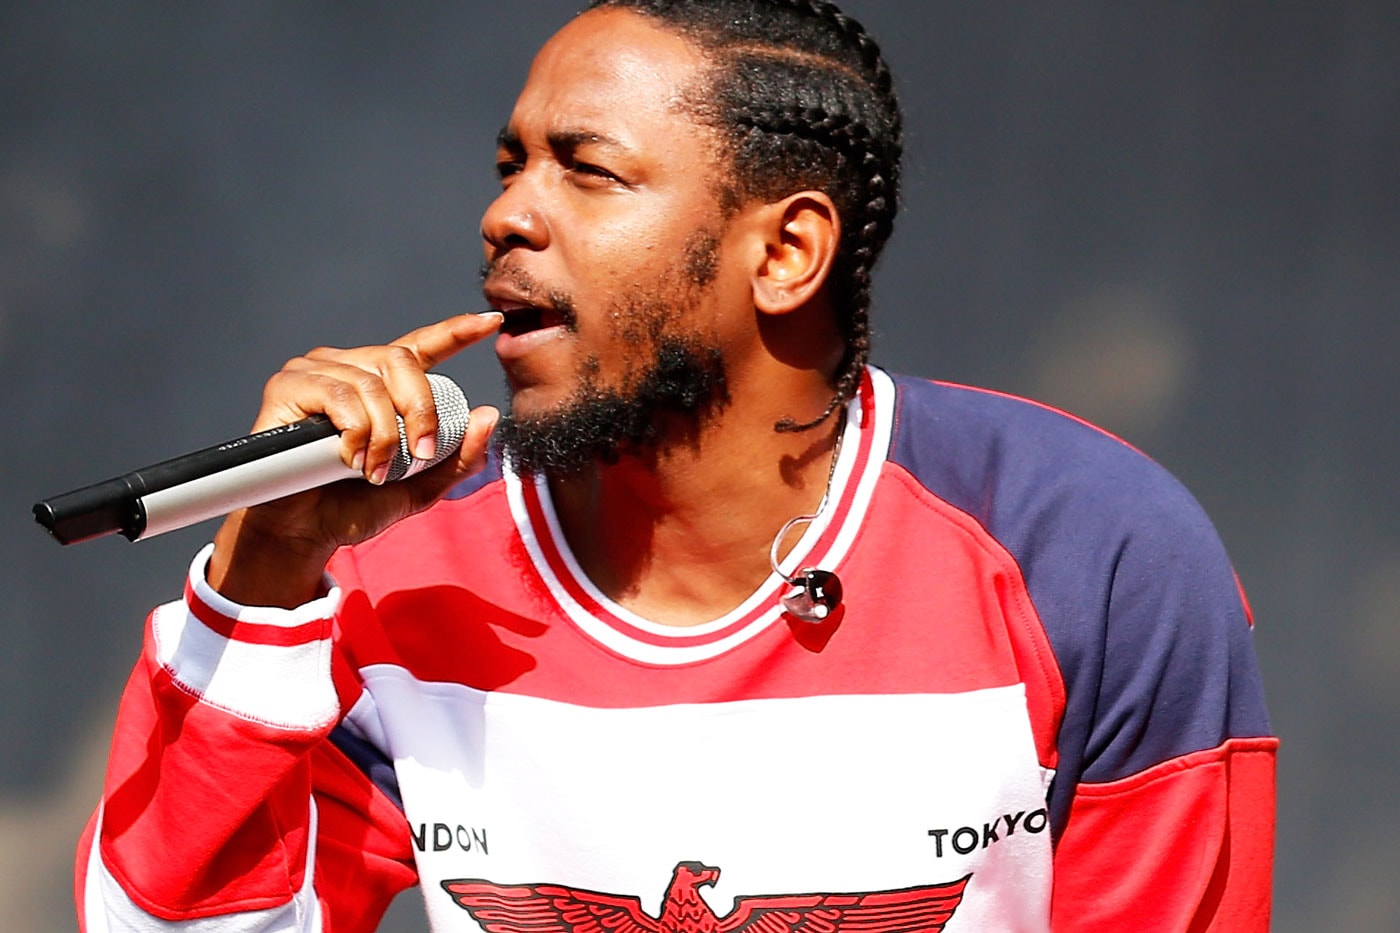 Kendrick Lamar's "Alright" Chanted by Million Man March Activists on 20th Anniversary